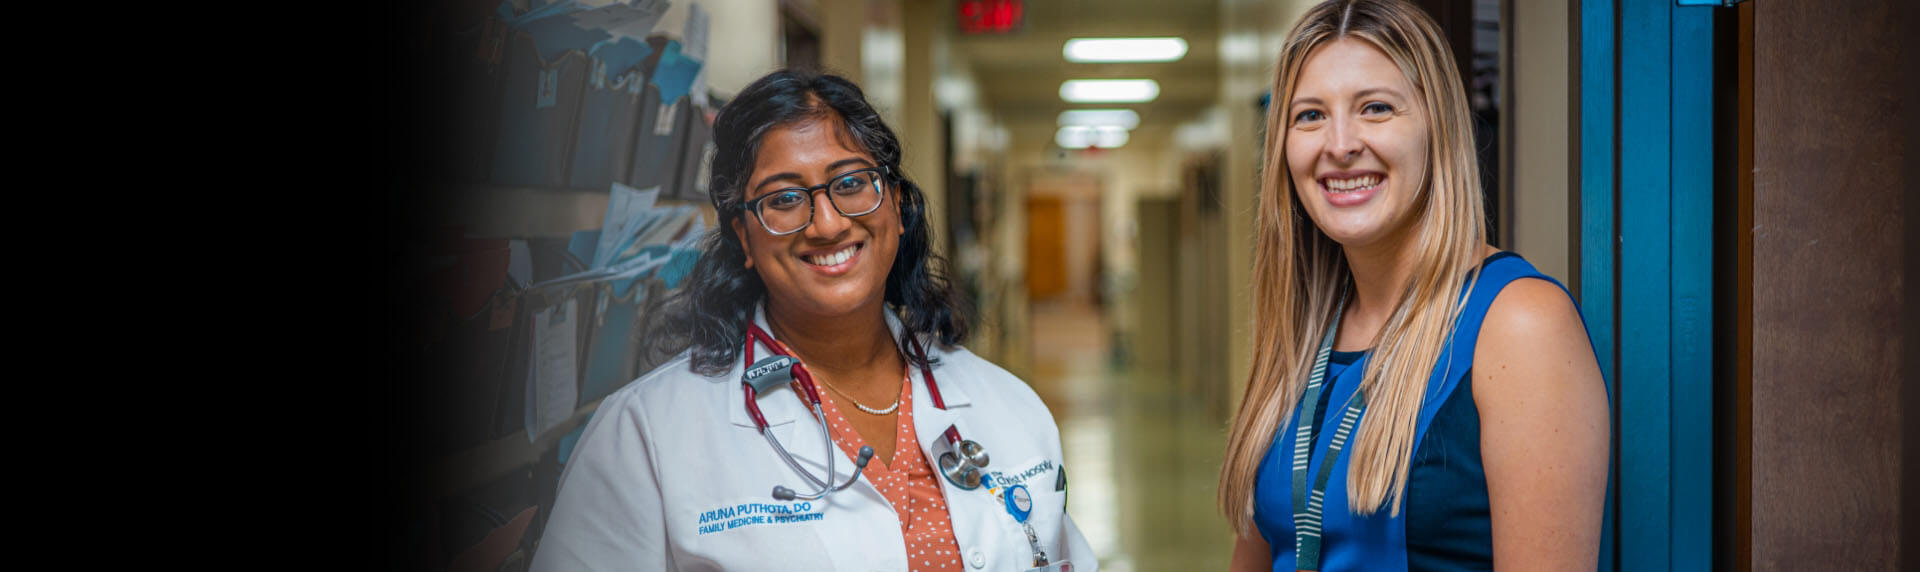 Two Christ Hospital medical professionals smiling with the headline: “Everything it takes so everyone can excel”